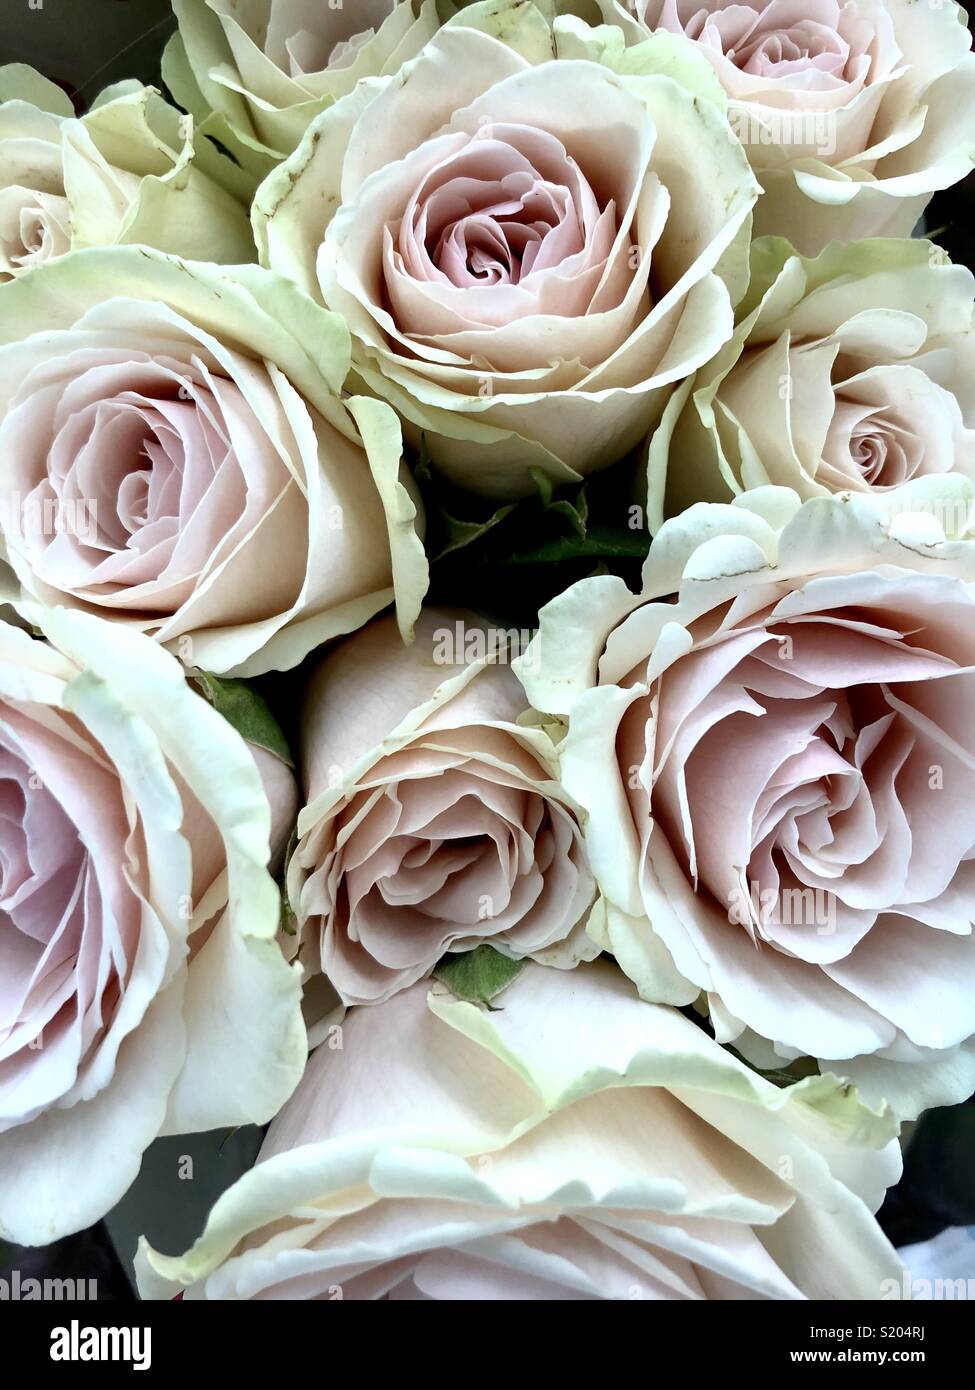 Bouquet of pale pink roses Stock Photo